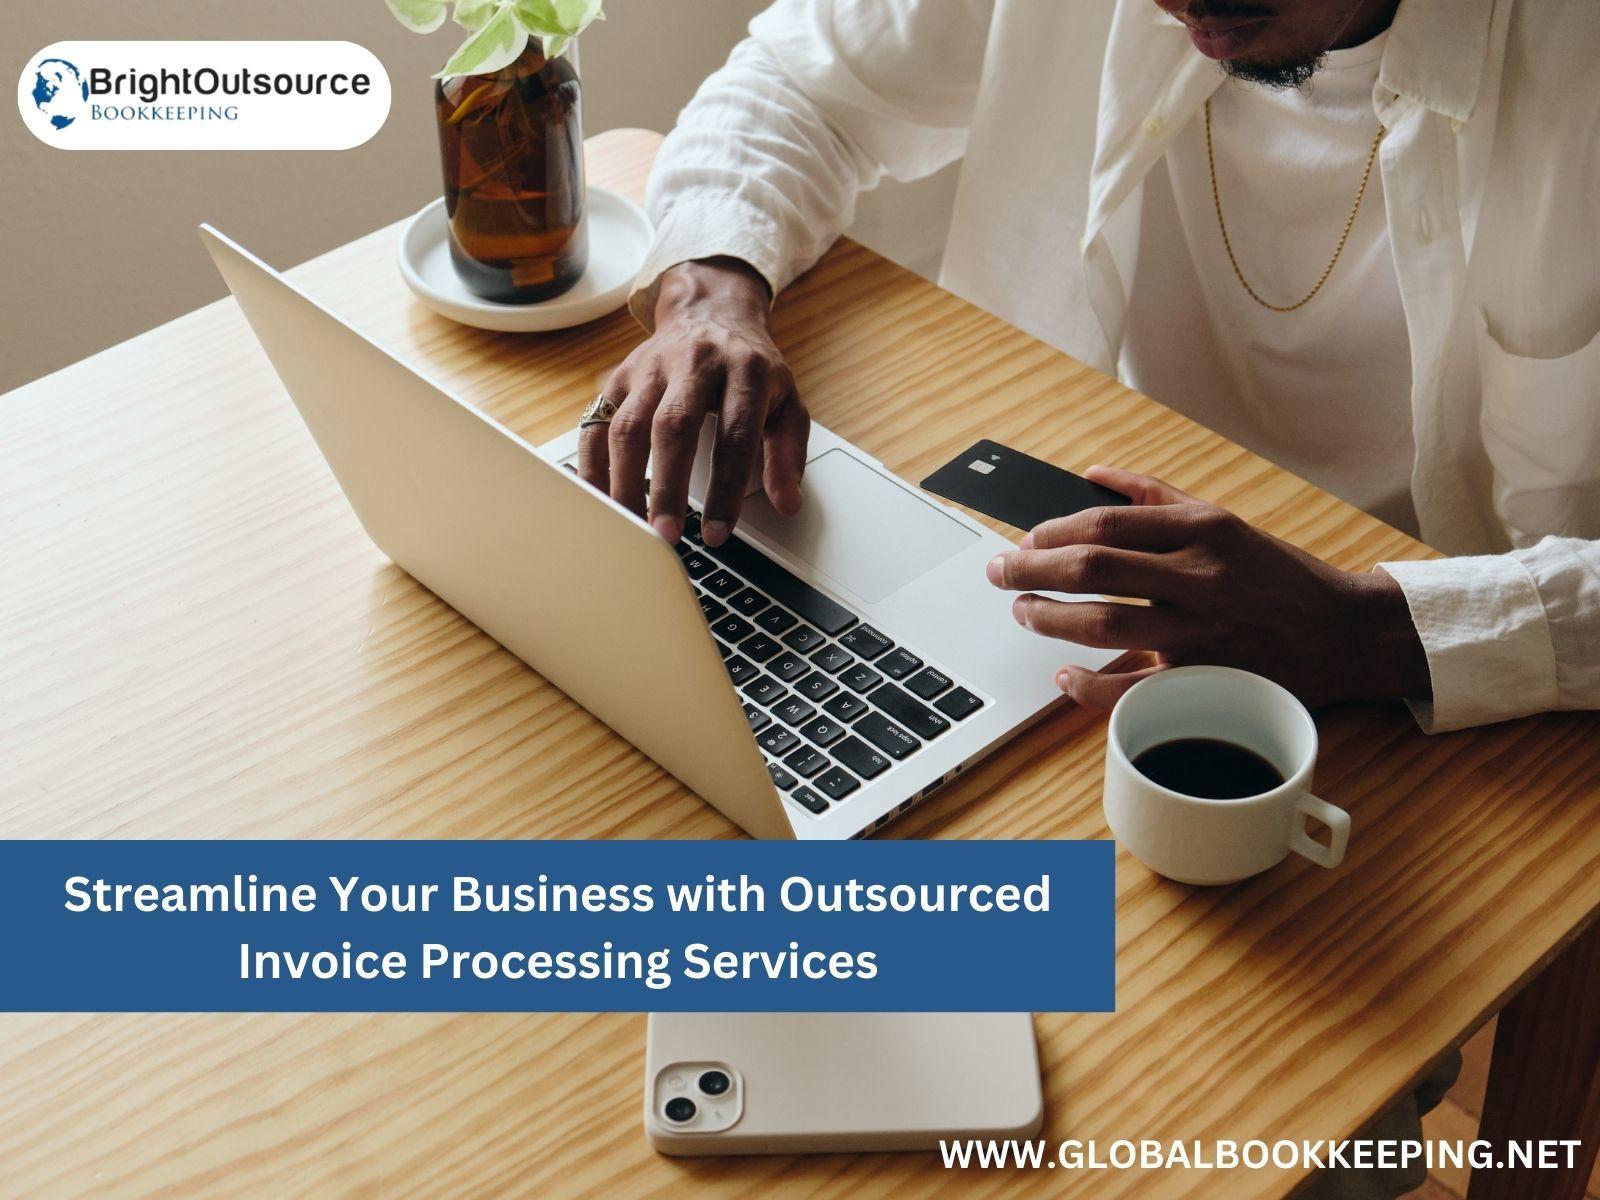 Streamline Your Business with Outsourced Invoice Processing Services